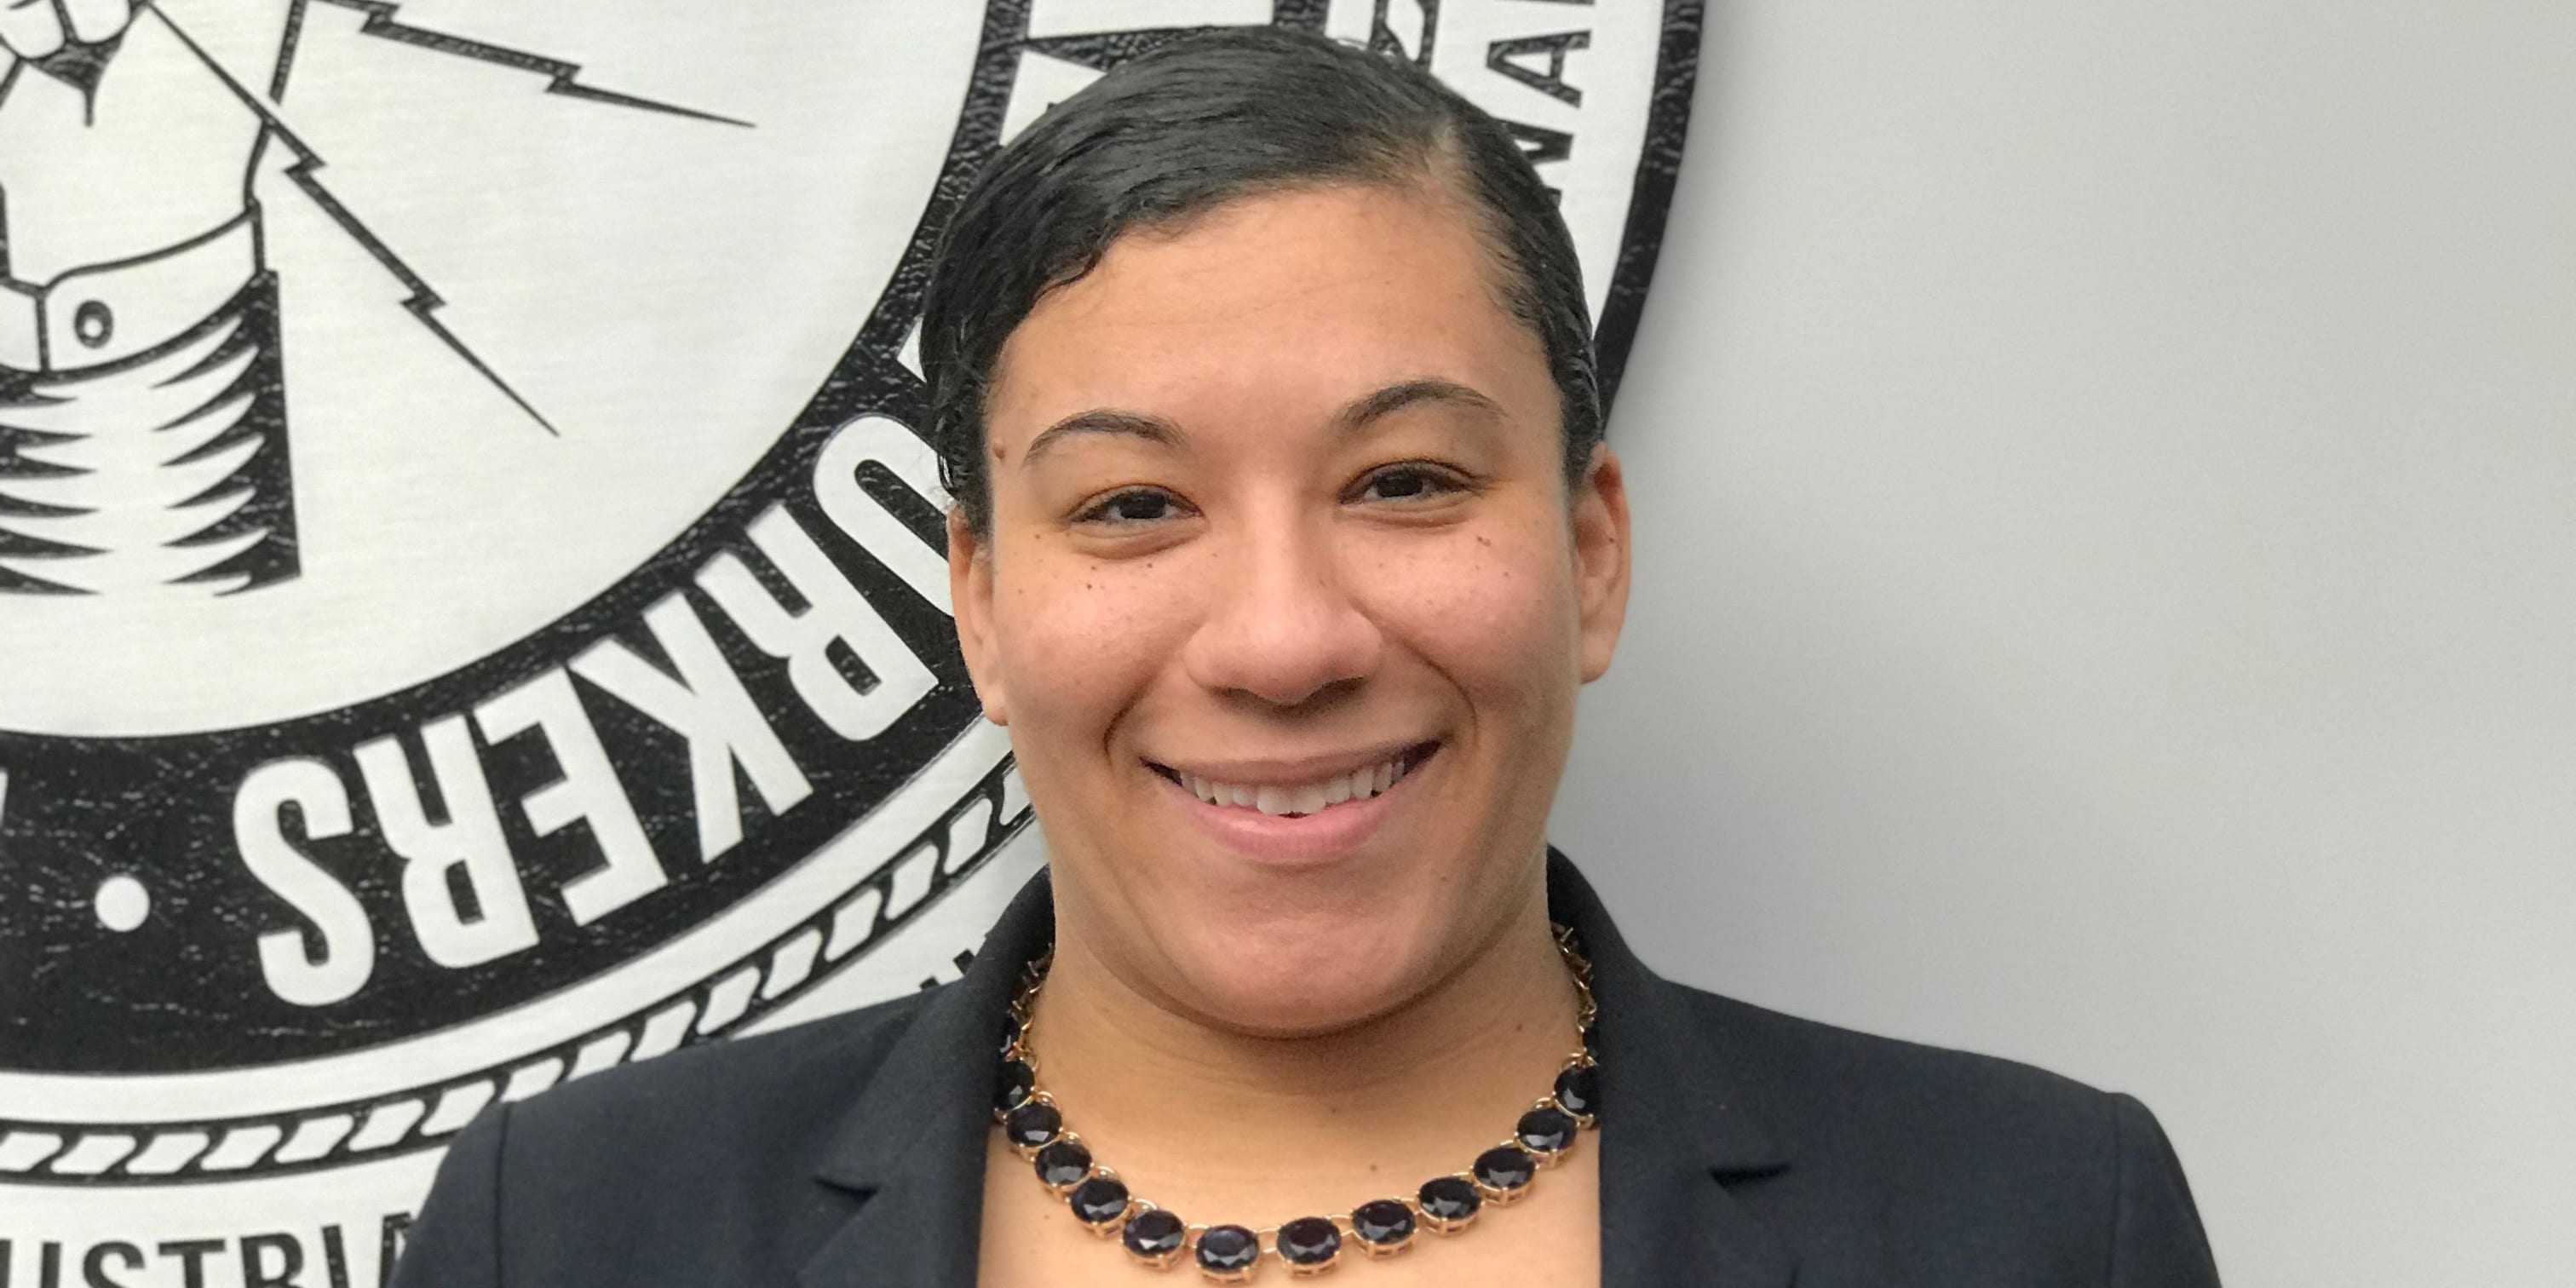 Kenell Broomstein, a Lynn Tech graduate, is the first woman of color to be named to a leadership role at any major Boston construction union.